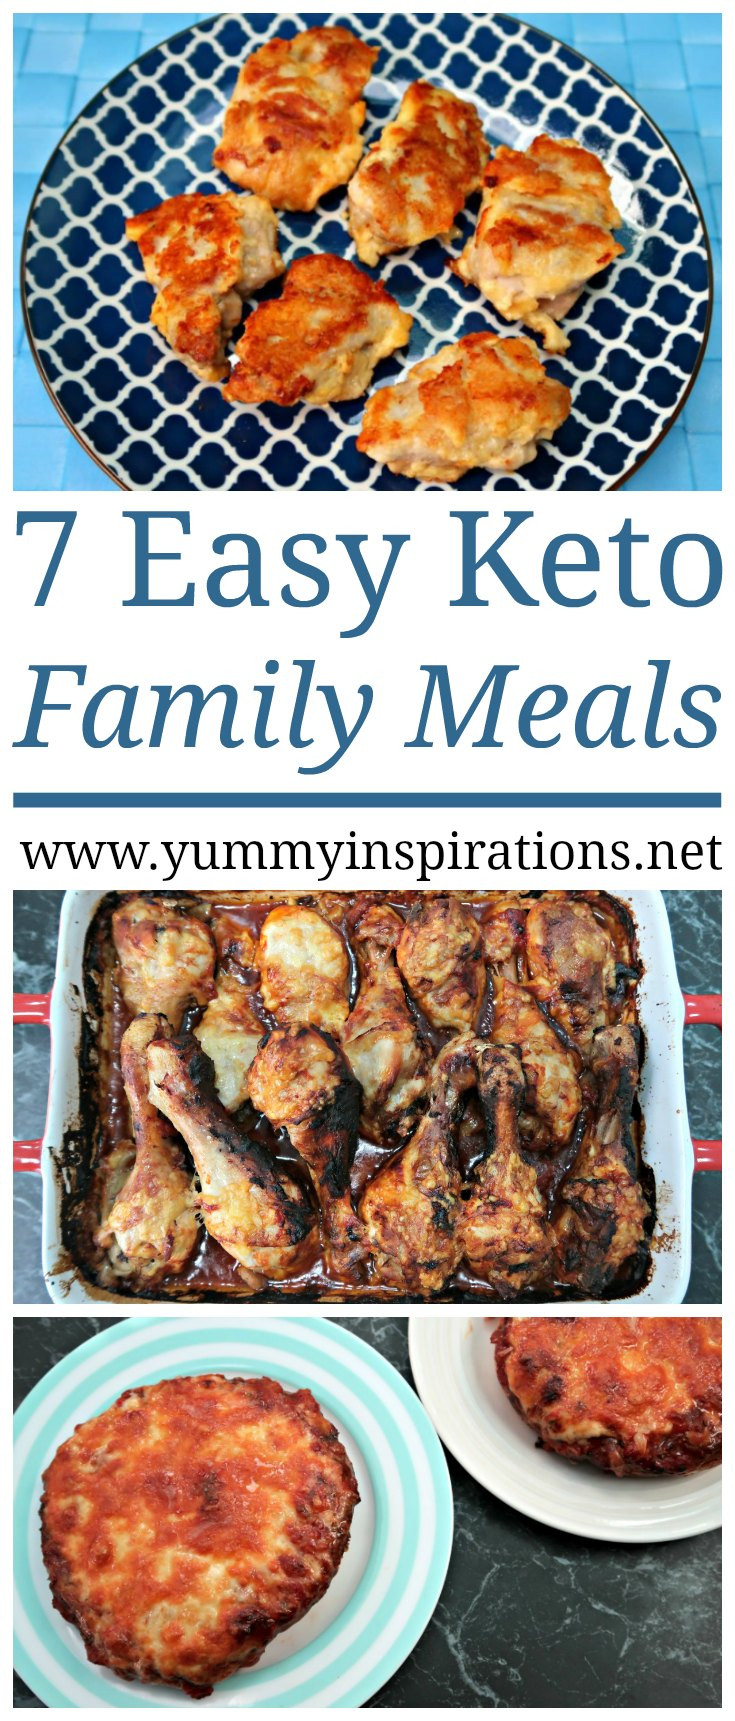 Keto Dinner Recipes For Family
 7 Keto Family Meals How to follow the Ketogenic Diet